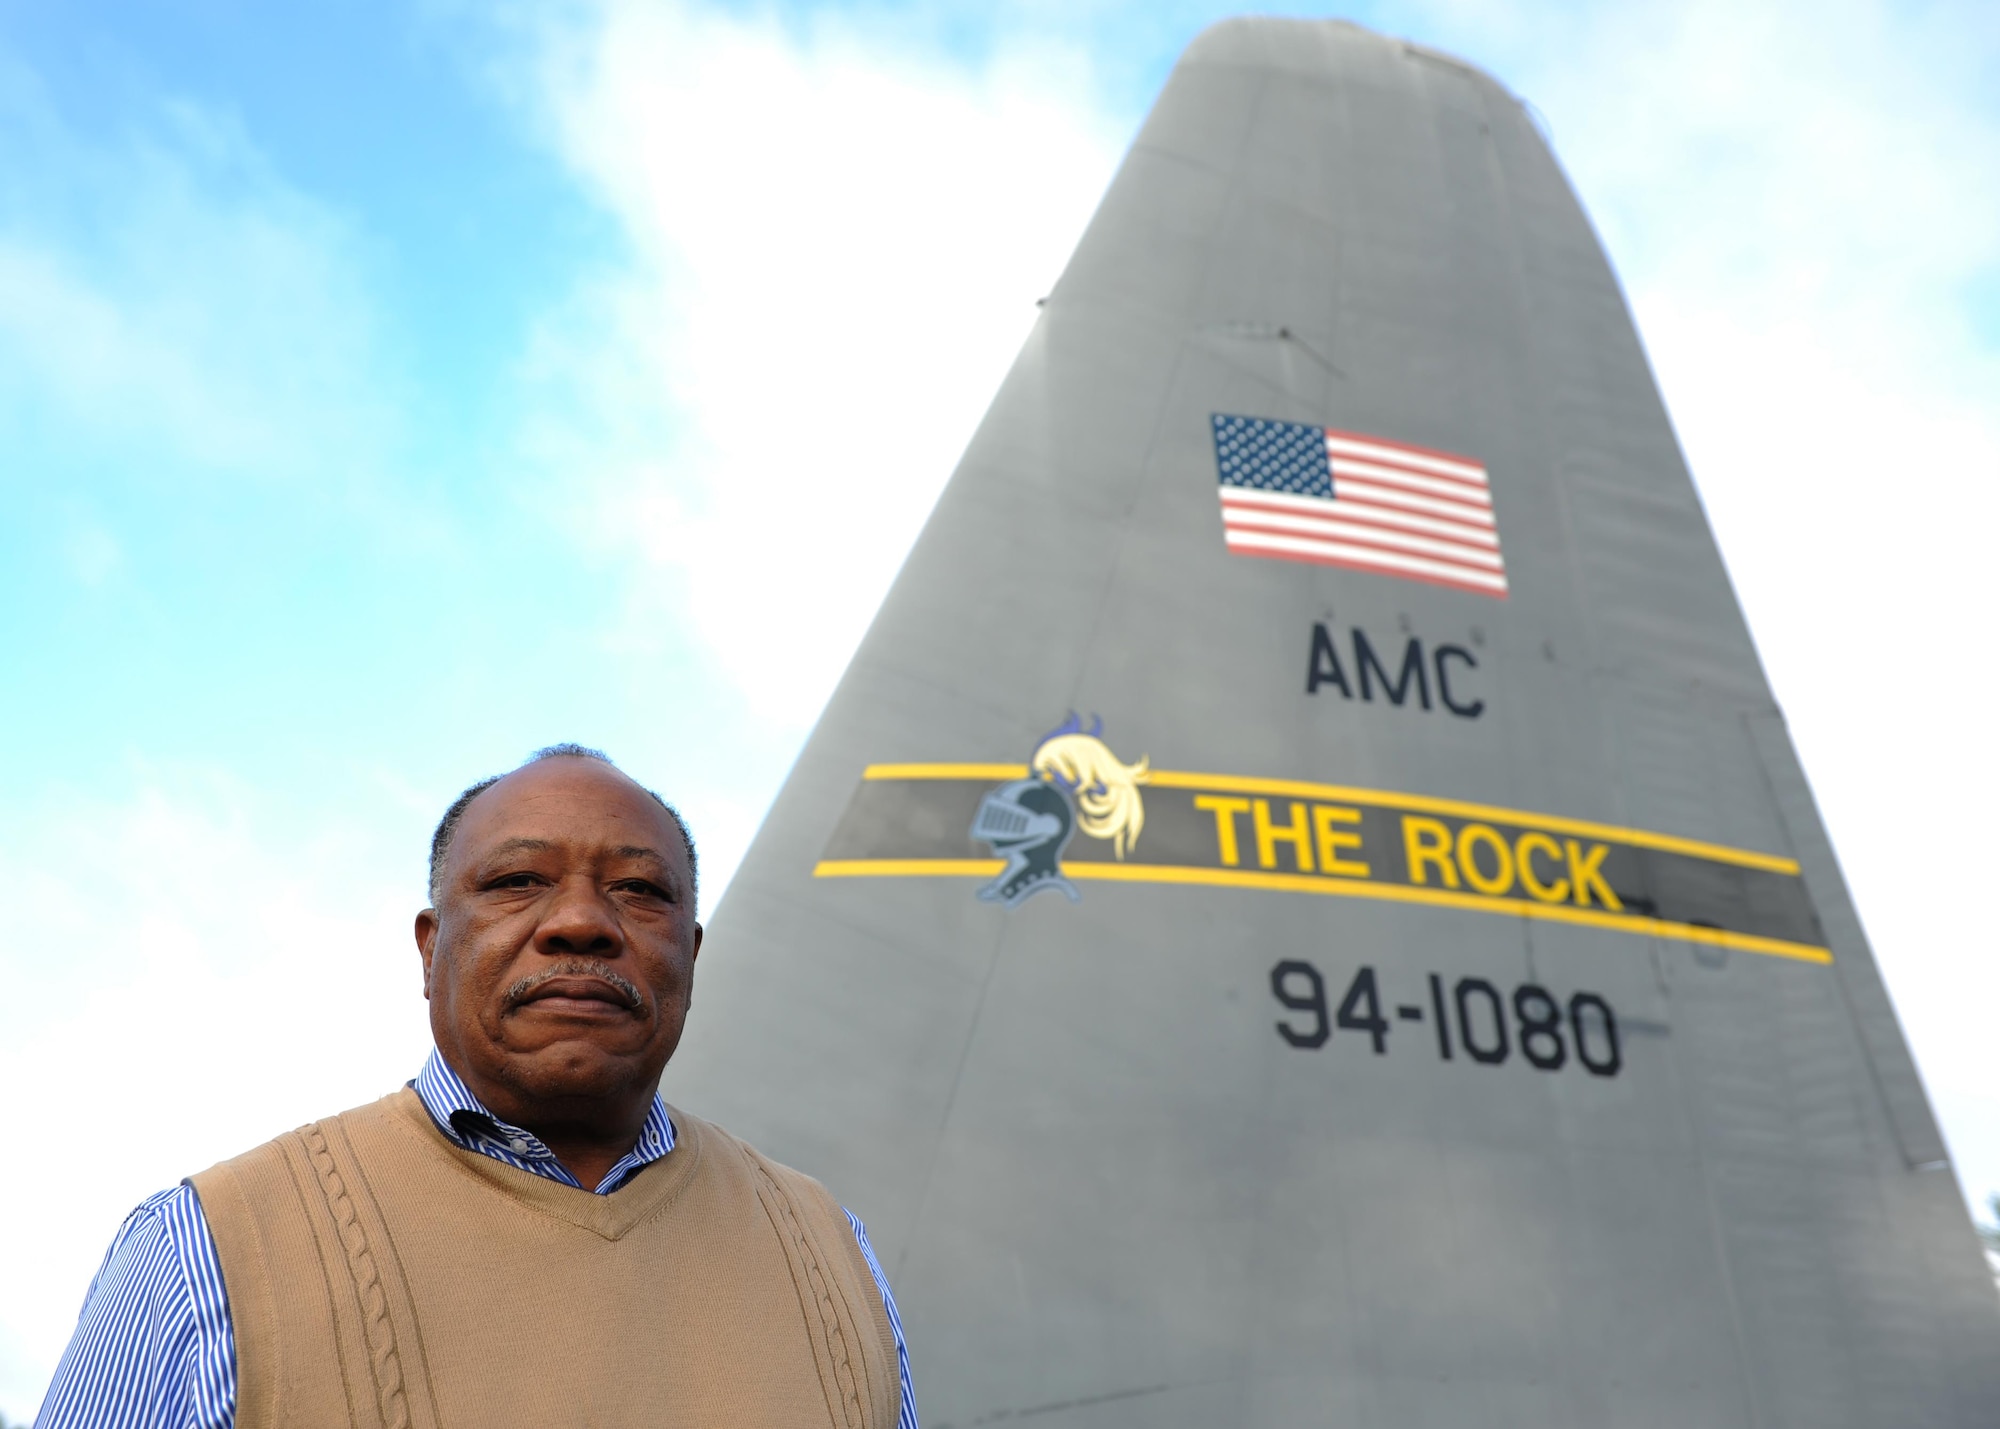 Retired U.S. Air Force Chief Master Sgt. Willie Goodwin, 19th Maintenance Group Engineering and technical services specialist, stands in front of the old tail of the last C-130E to leave Little Rock Air Force Base. The tail was removed from the C-130E and repainted to serve as a landmark in front of Hangar 1080. (U.S. Air Force photo by Airman 1st Class Grace Nichols)